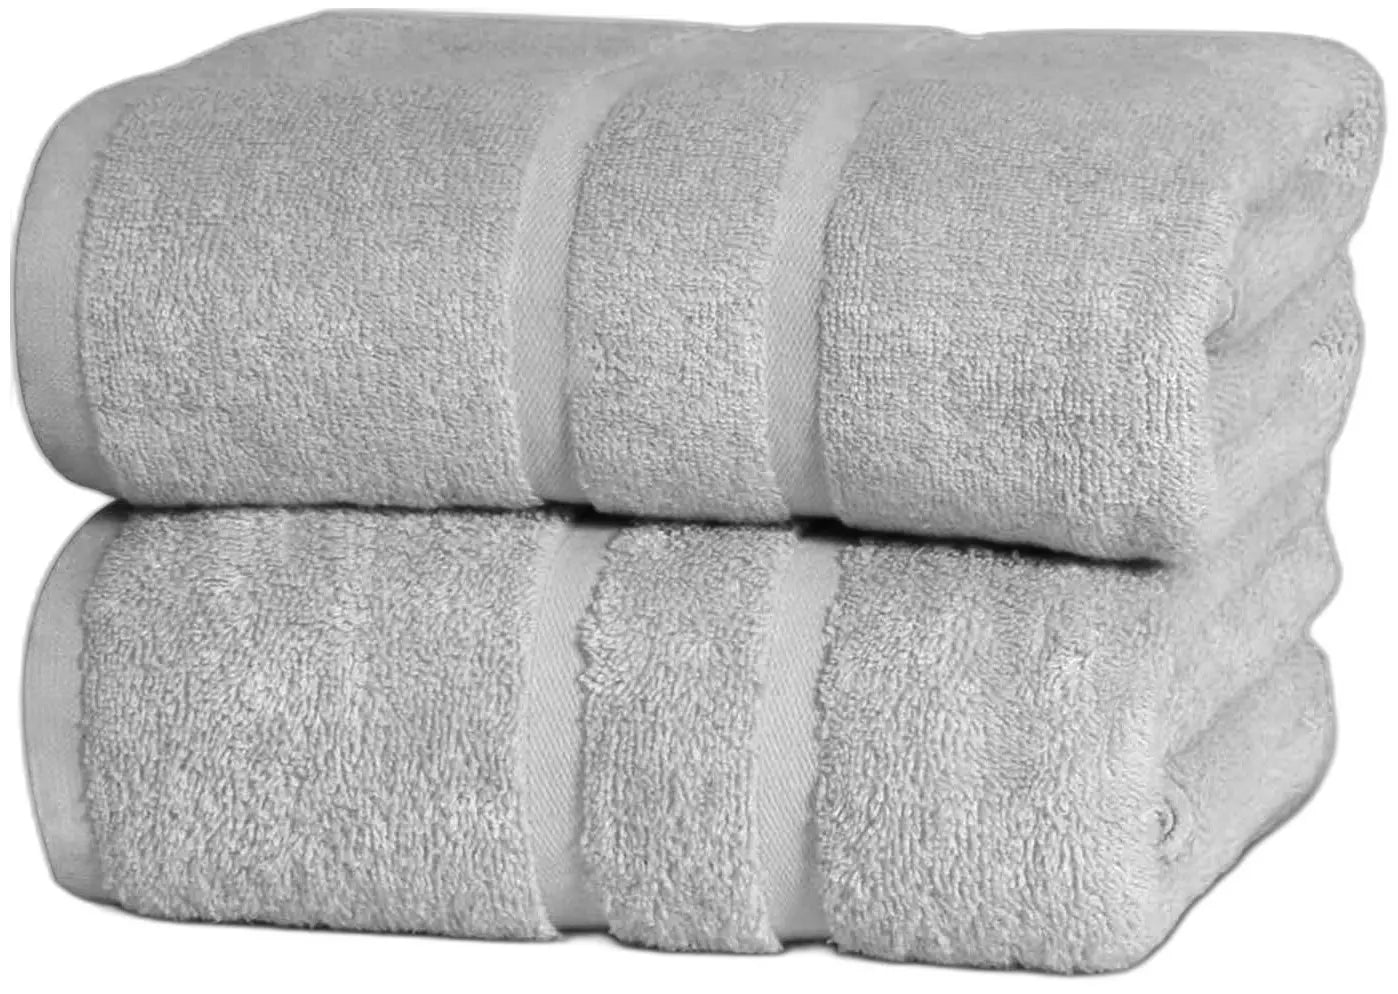 2x Bath Sheets Soft 100% Egyptian Cotton Extra Large 600-GSM Towels 100 x 200 cm